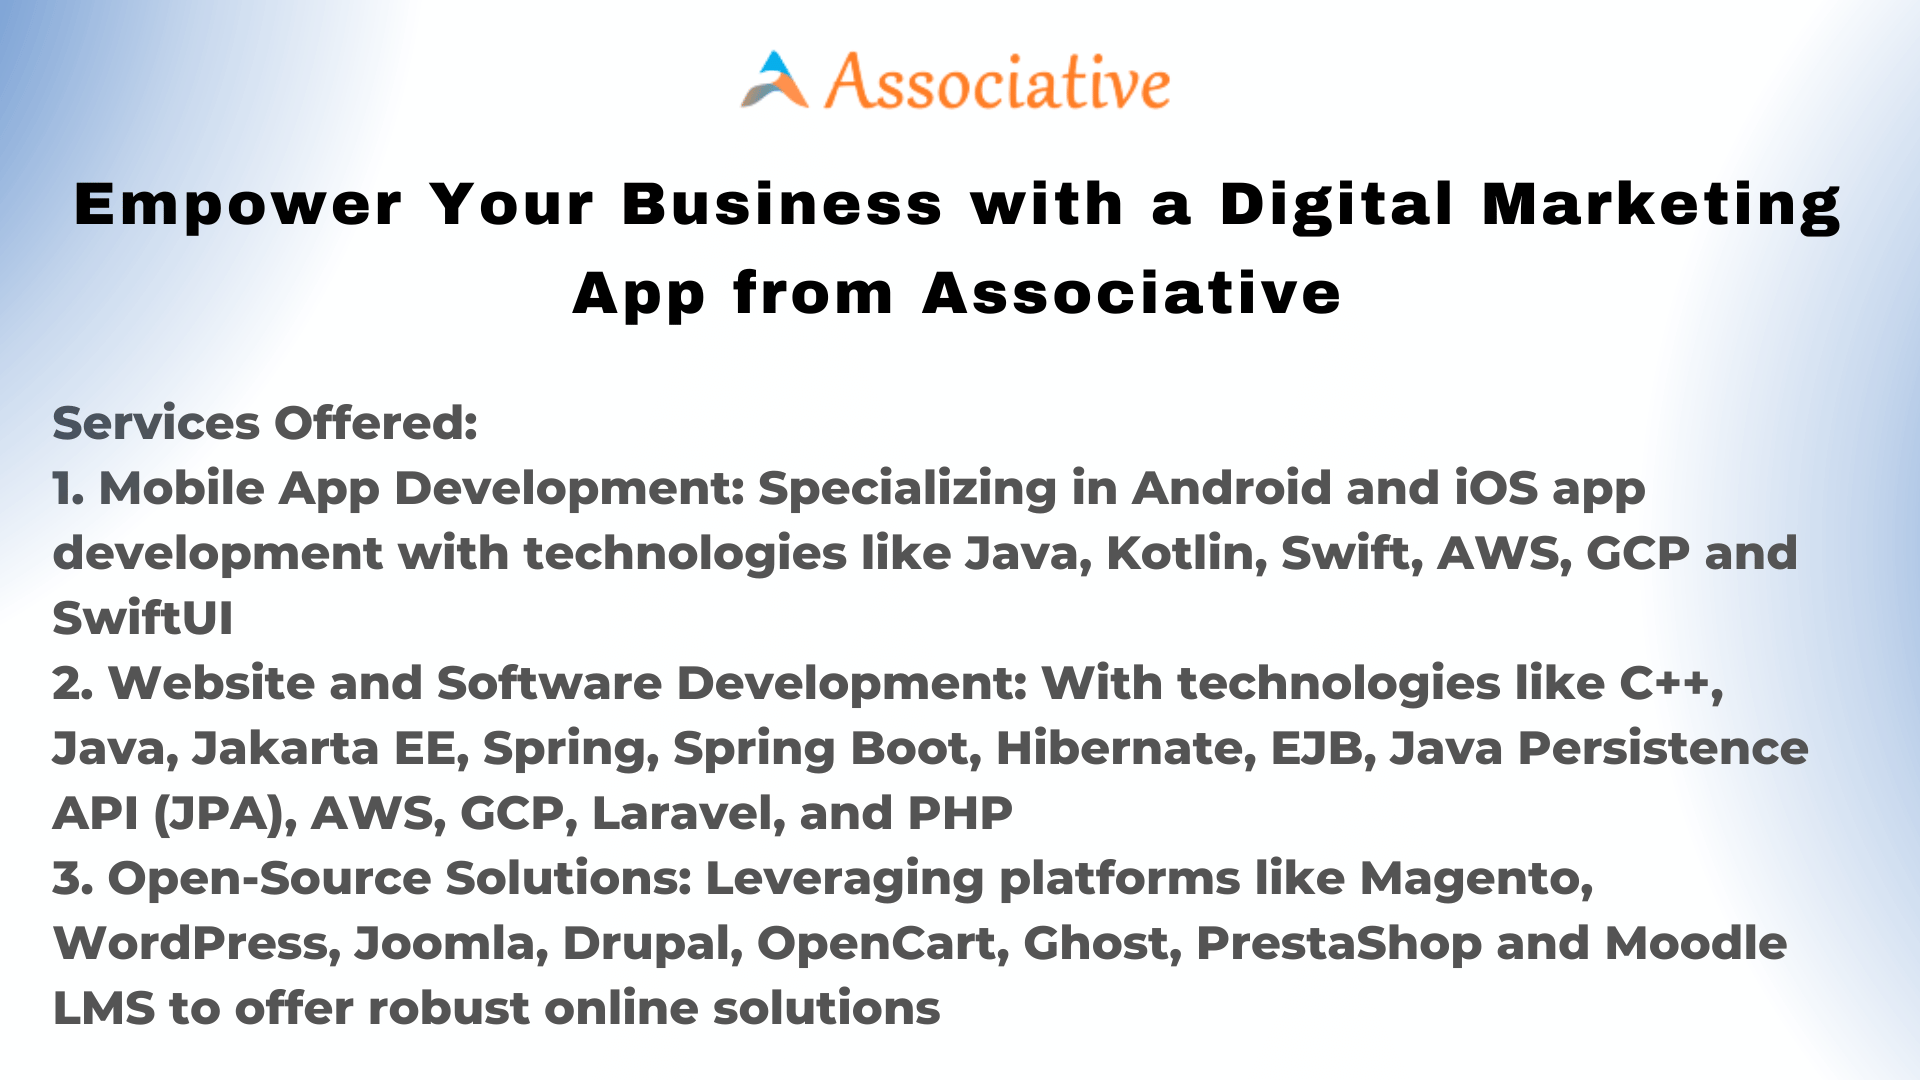 Empower Your Business with a Digital Marketing App from Associative